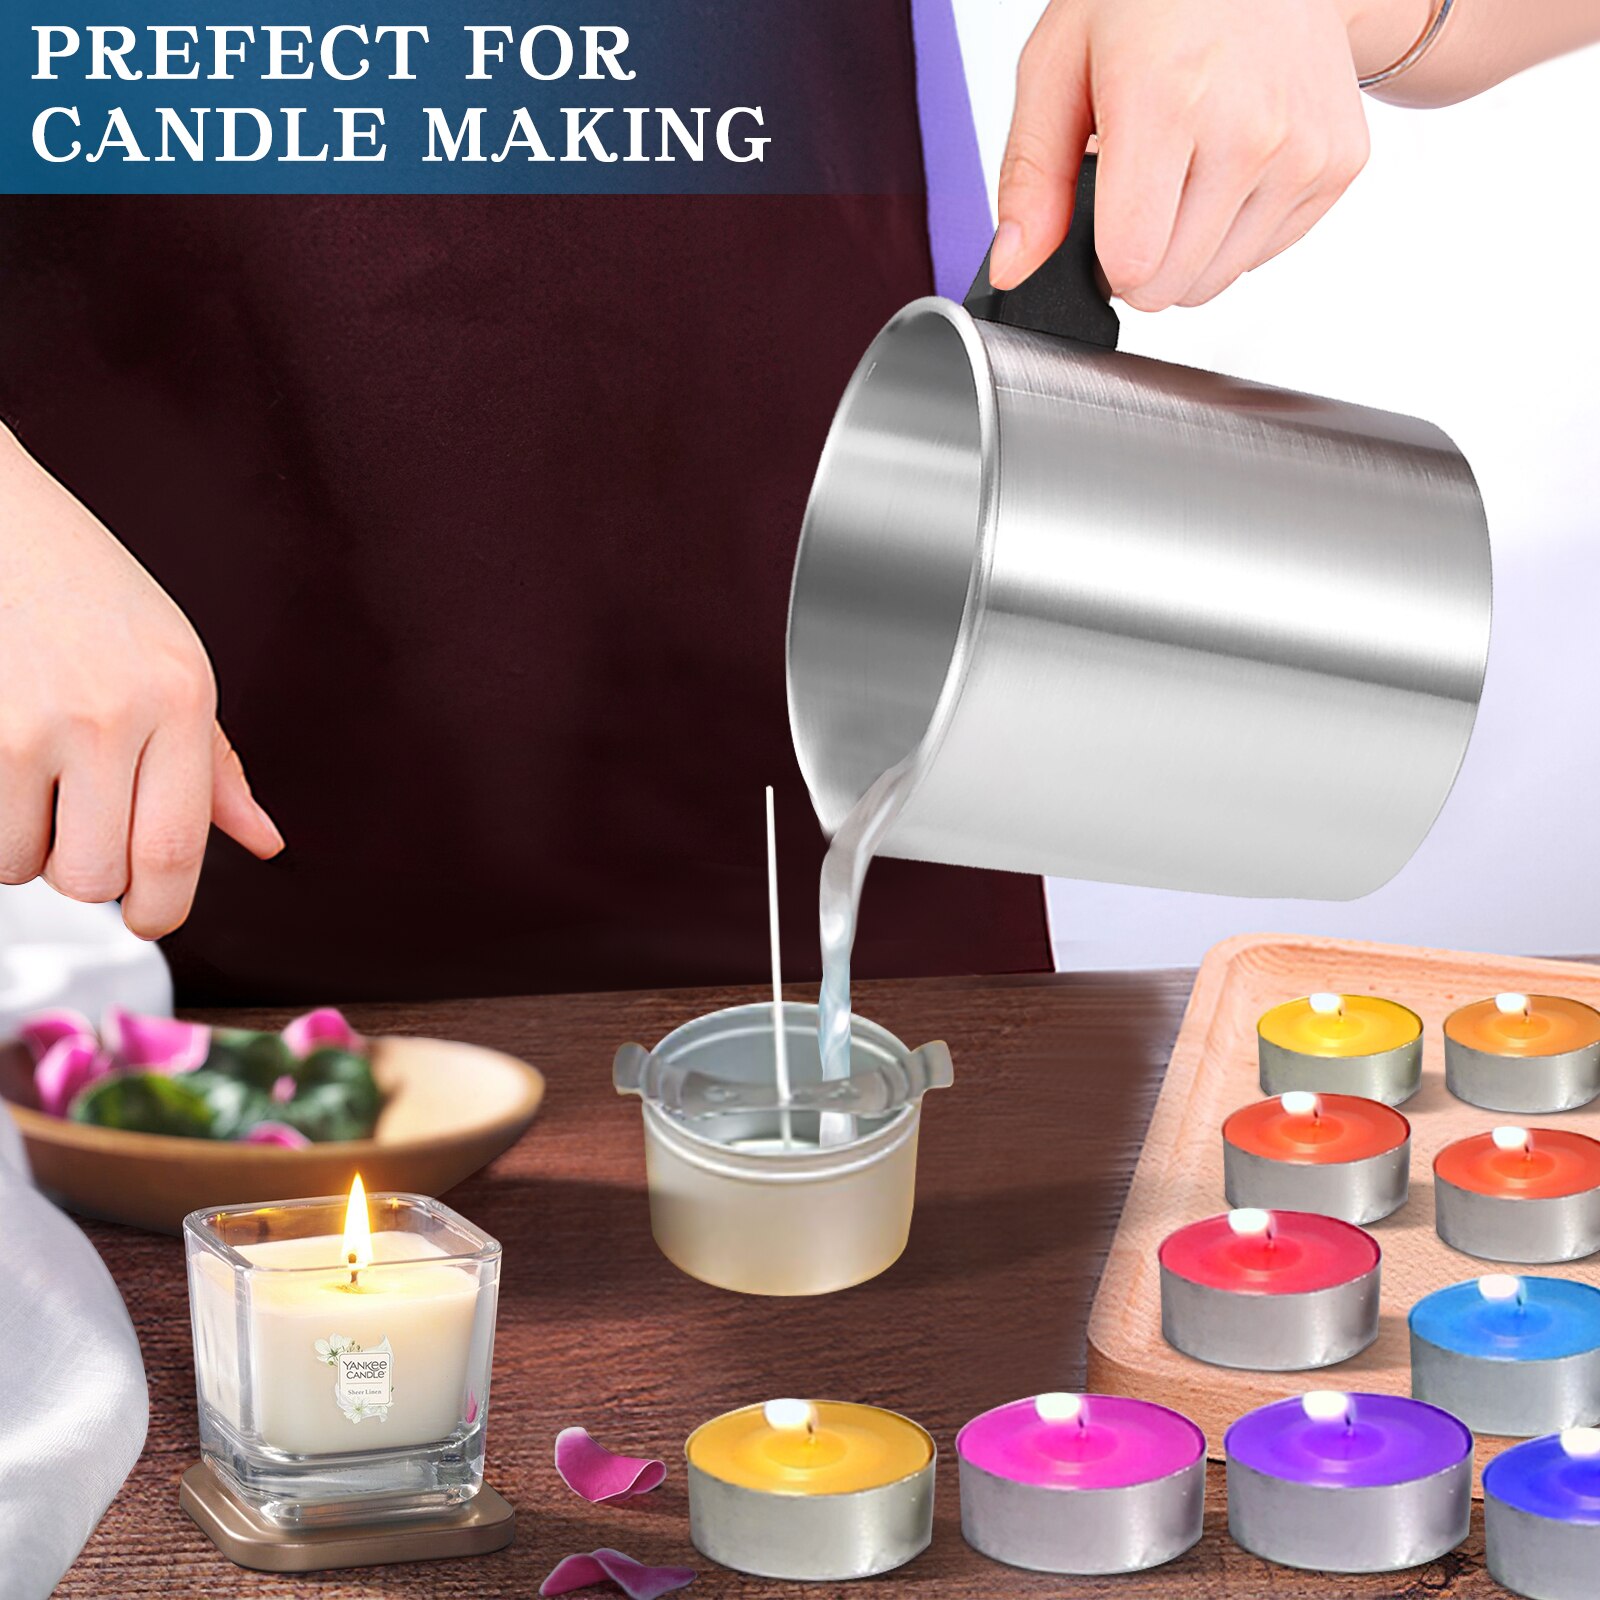 ENCANLIGHT Candle Making Supplies Candle Wax Melting Pot with Thermometer,  Candle Pouring Pot Holds up to 4 Pounds Wax - Perfect Candle Making Kit for Candle  Making, Soap Making or DIY Crafts